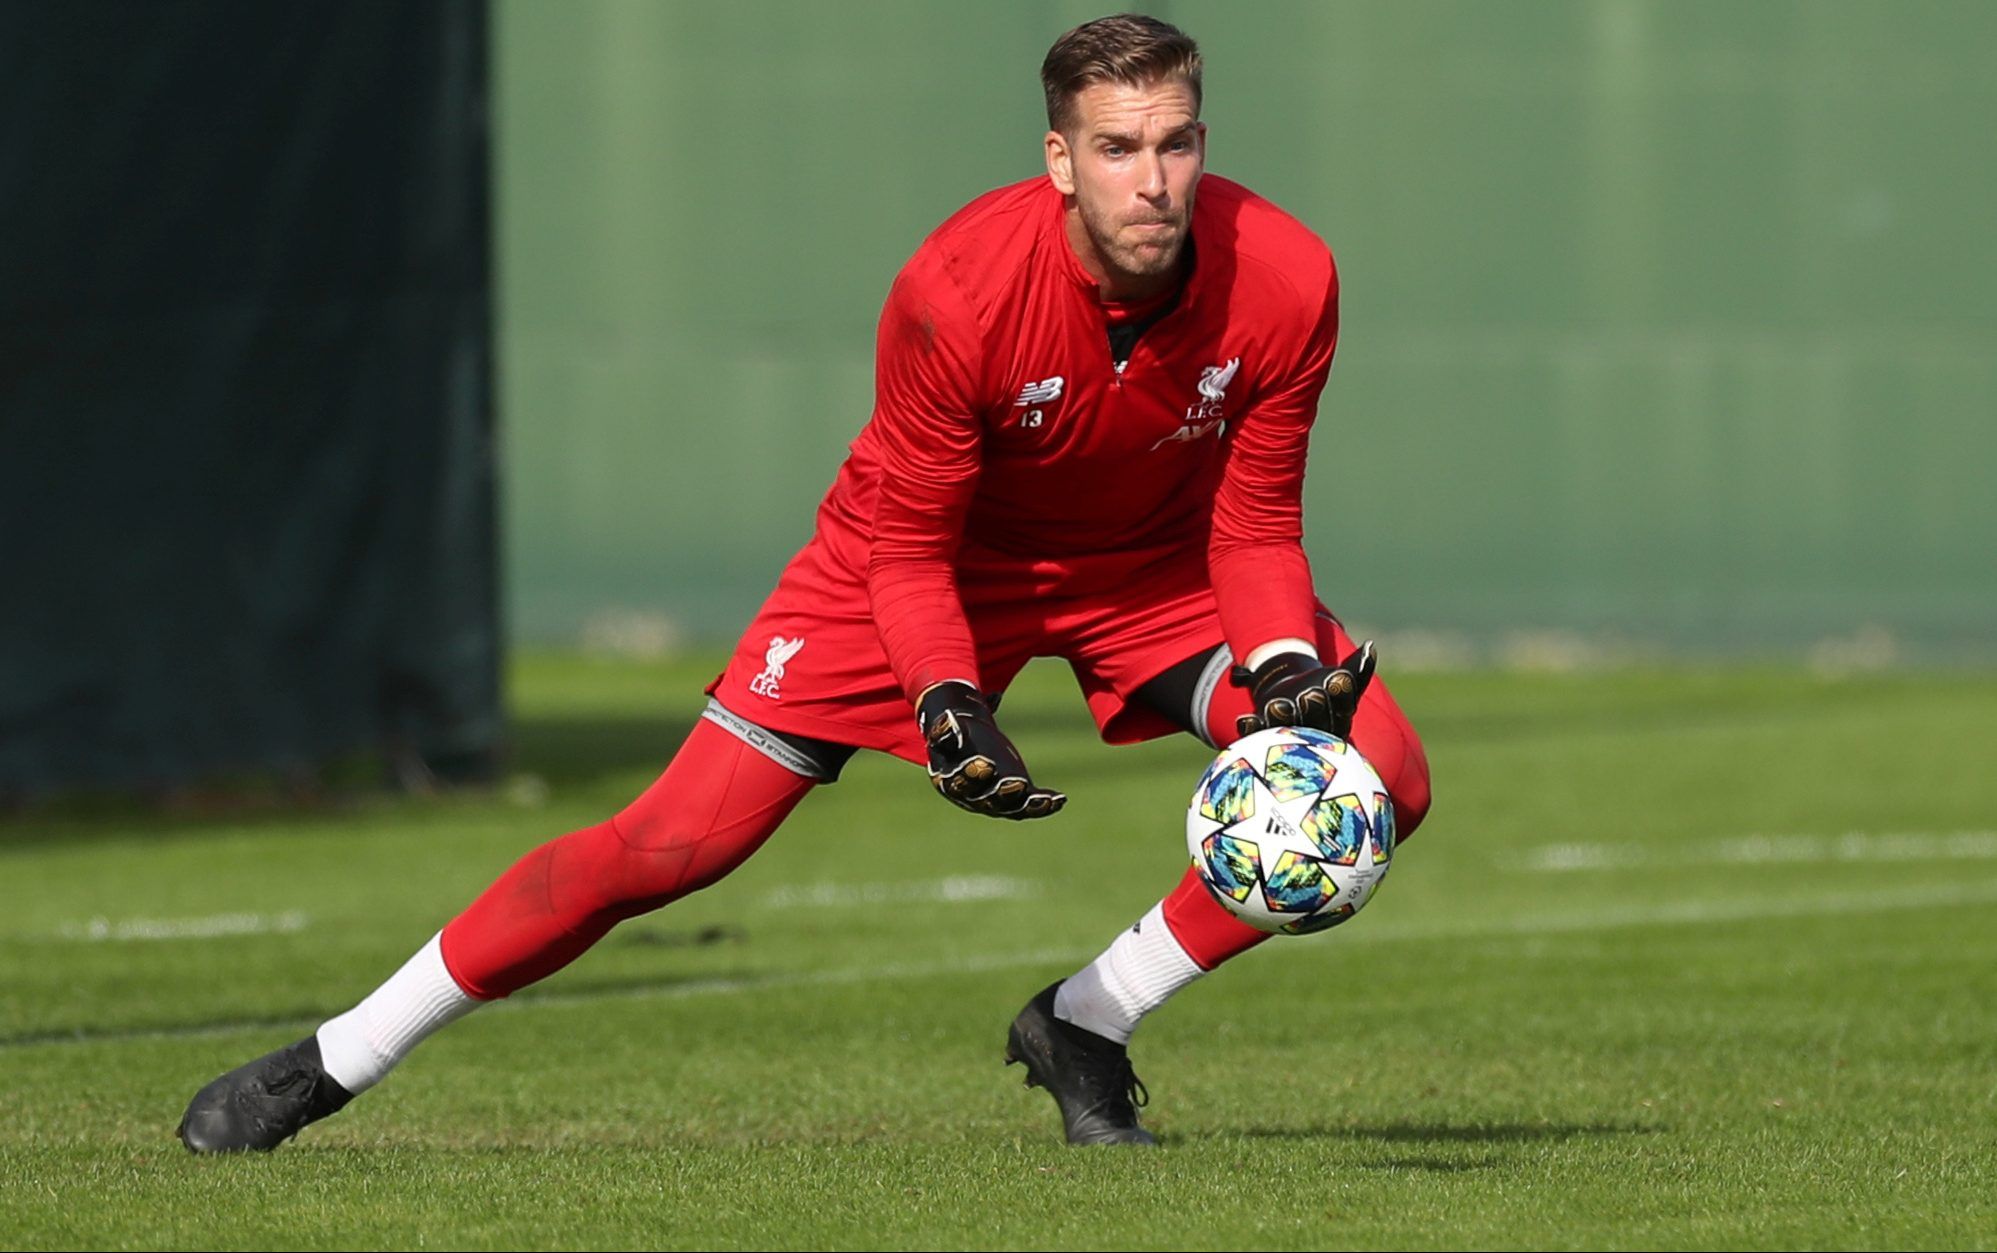 Soccer Football - Champions League - Liverpool Training - Melwood, Liverpool, Britain - September 16, 2019   Liverpool's Adrian during training   Action Images via Reuters/Lee Smith